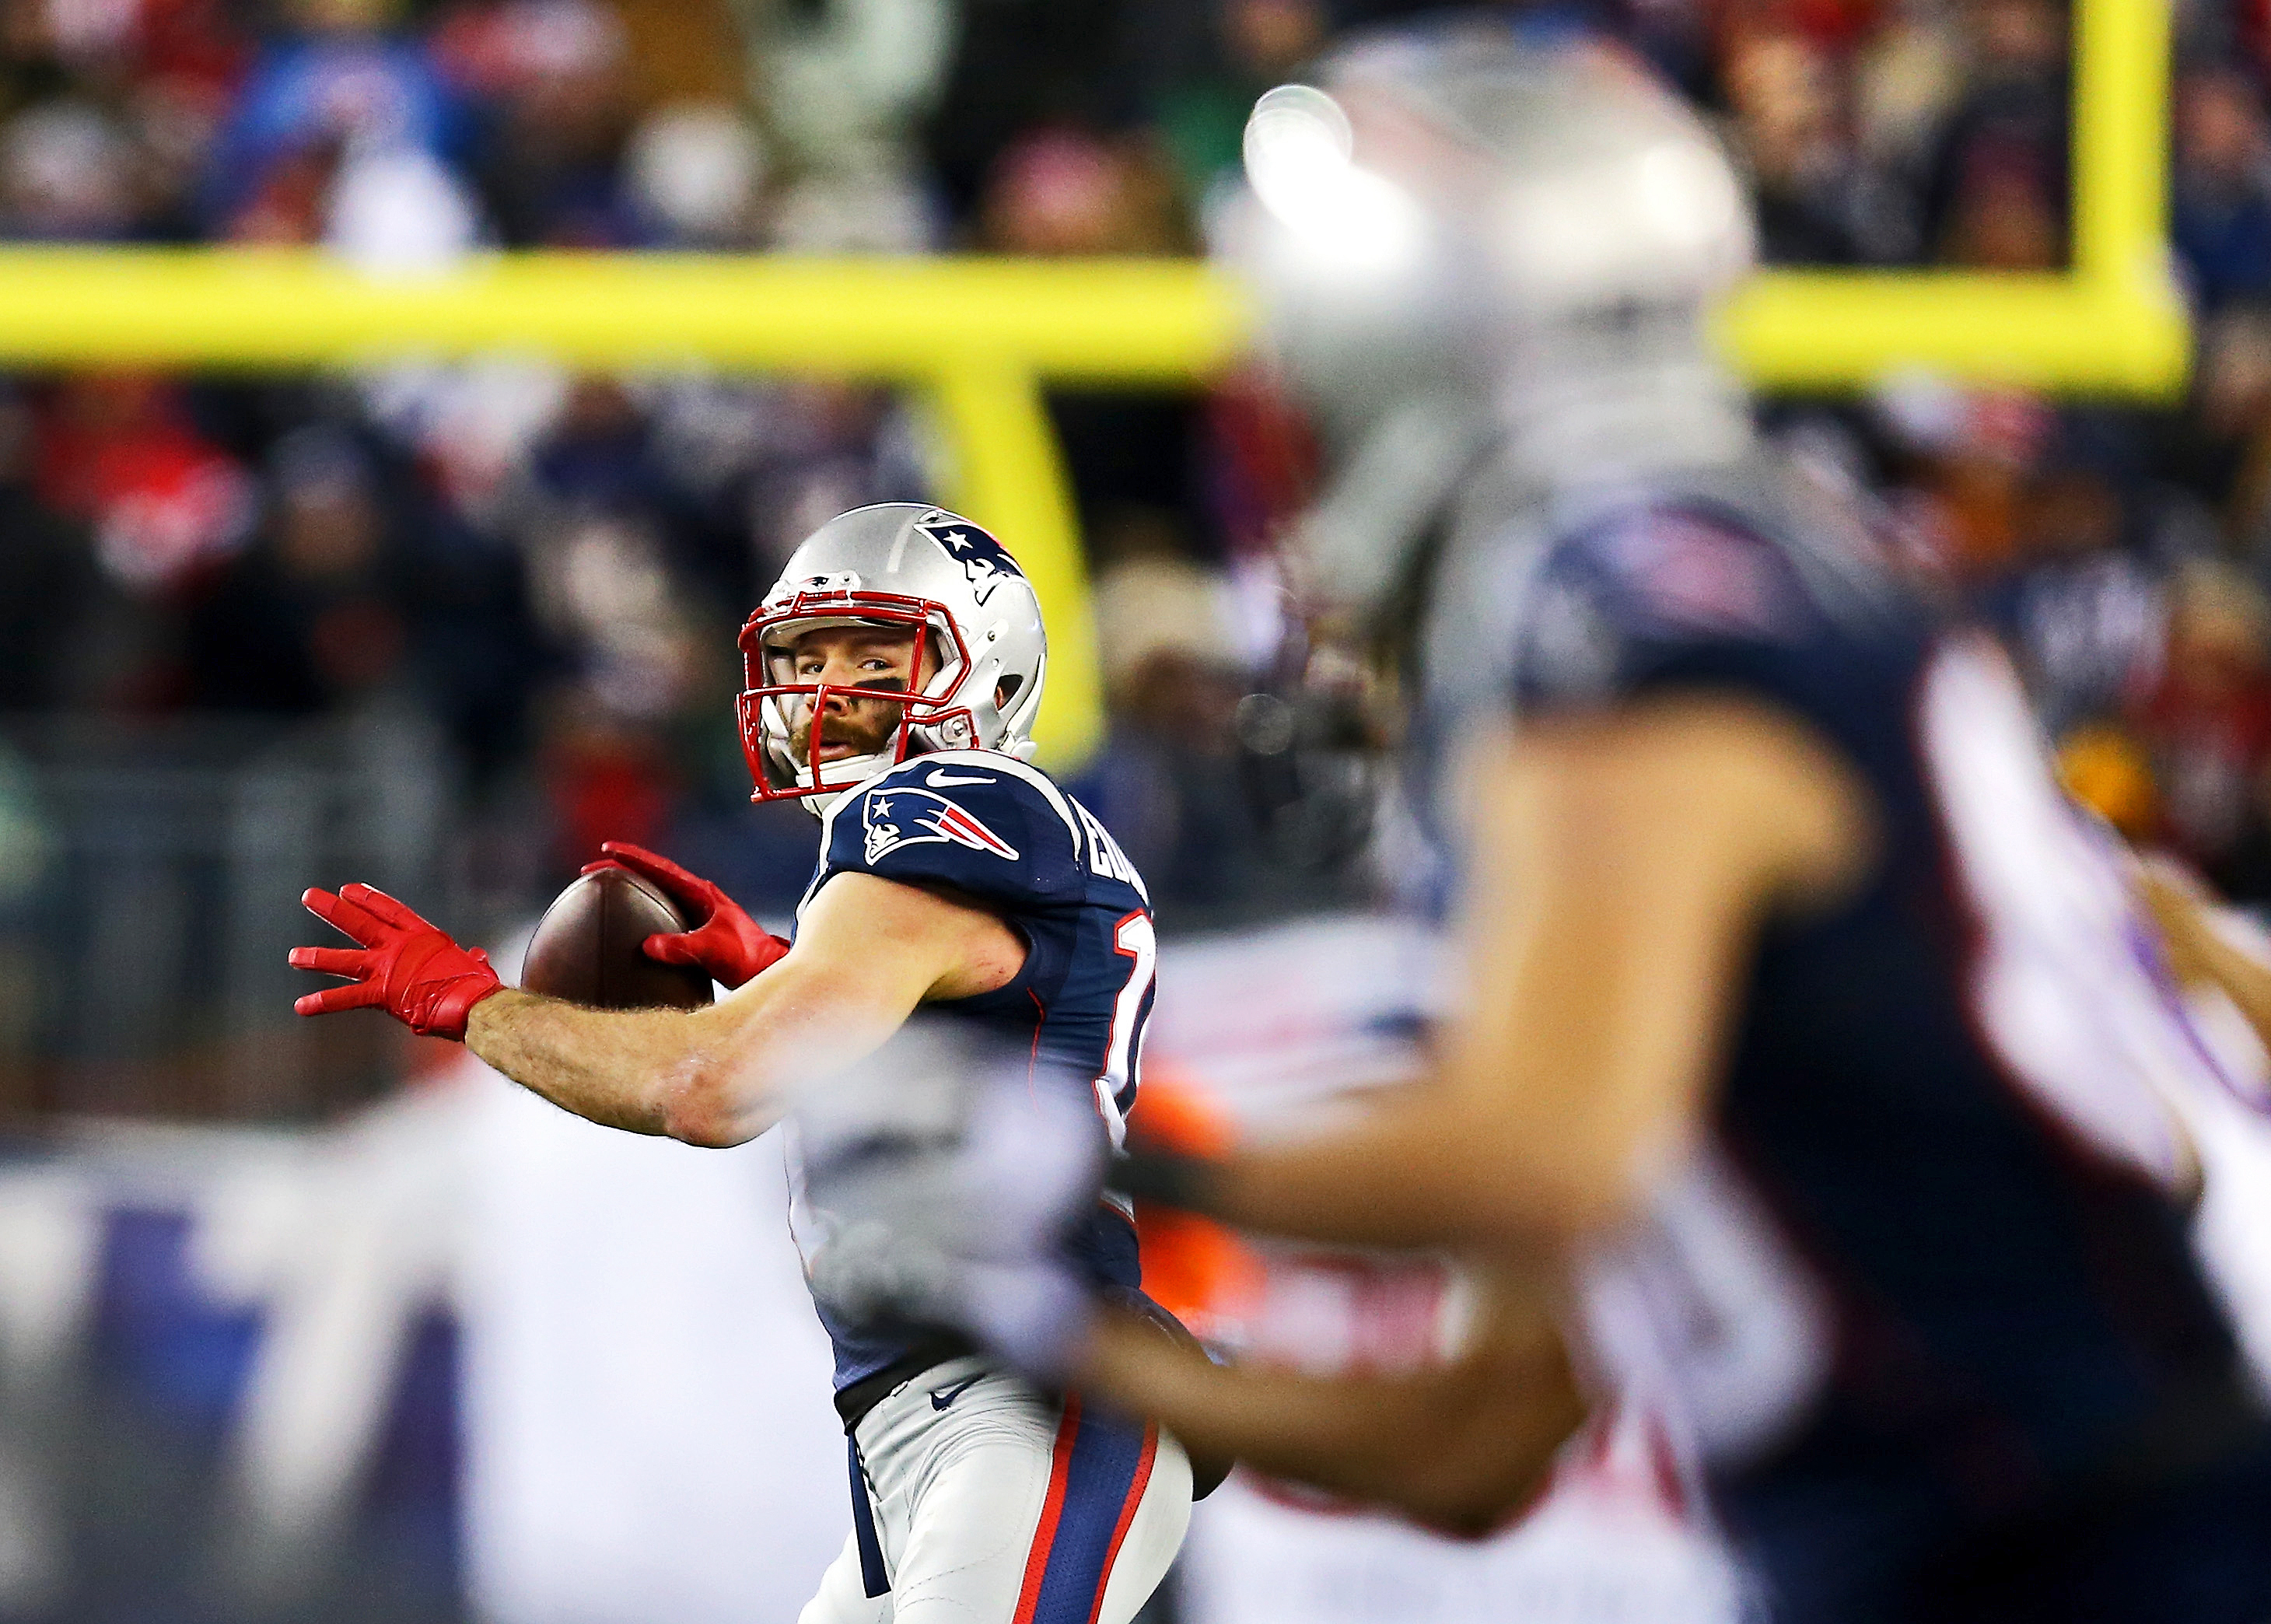 Julian Edelman targets Danny Amendola. (Photo by Maddie Meyer/Getty Images)